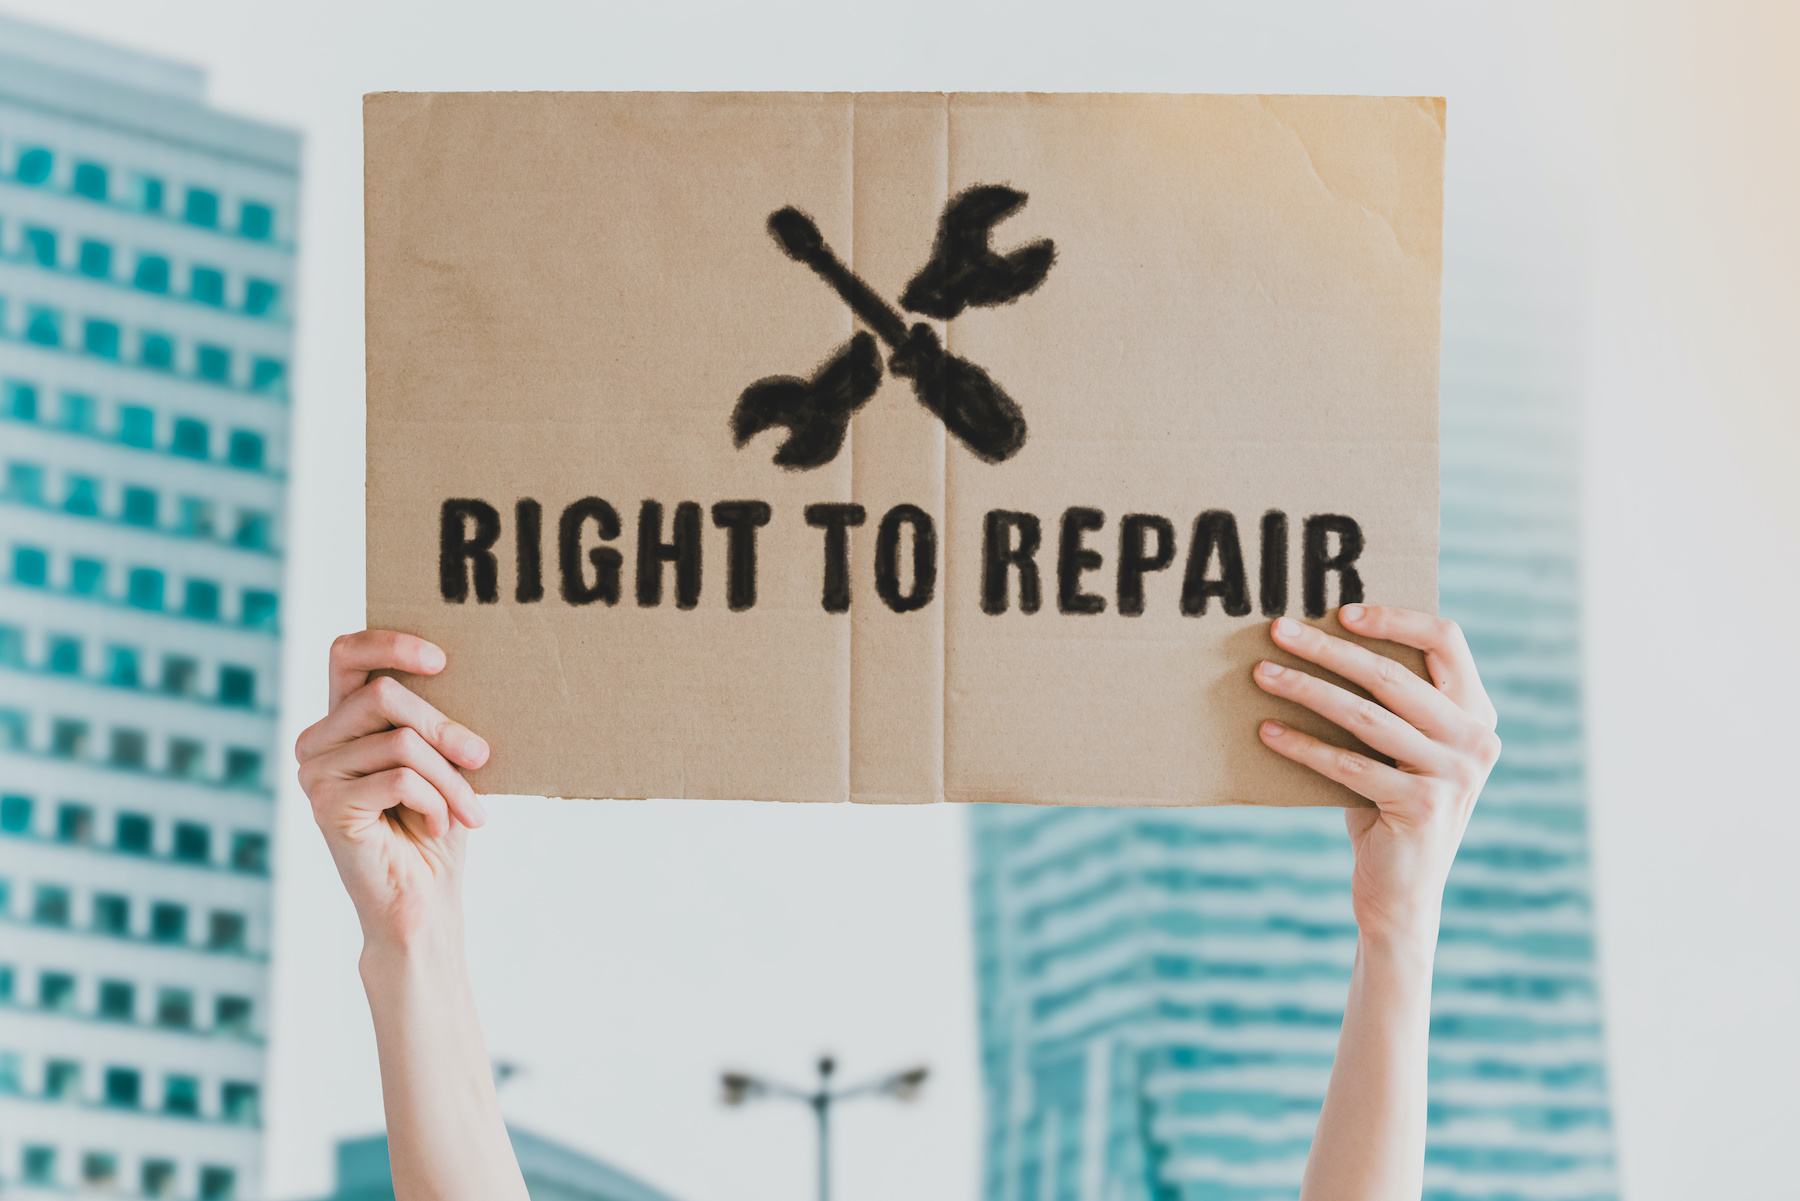 Person holding up a sign that says "Right to Repair."